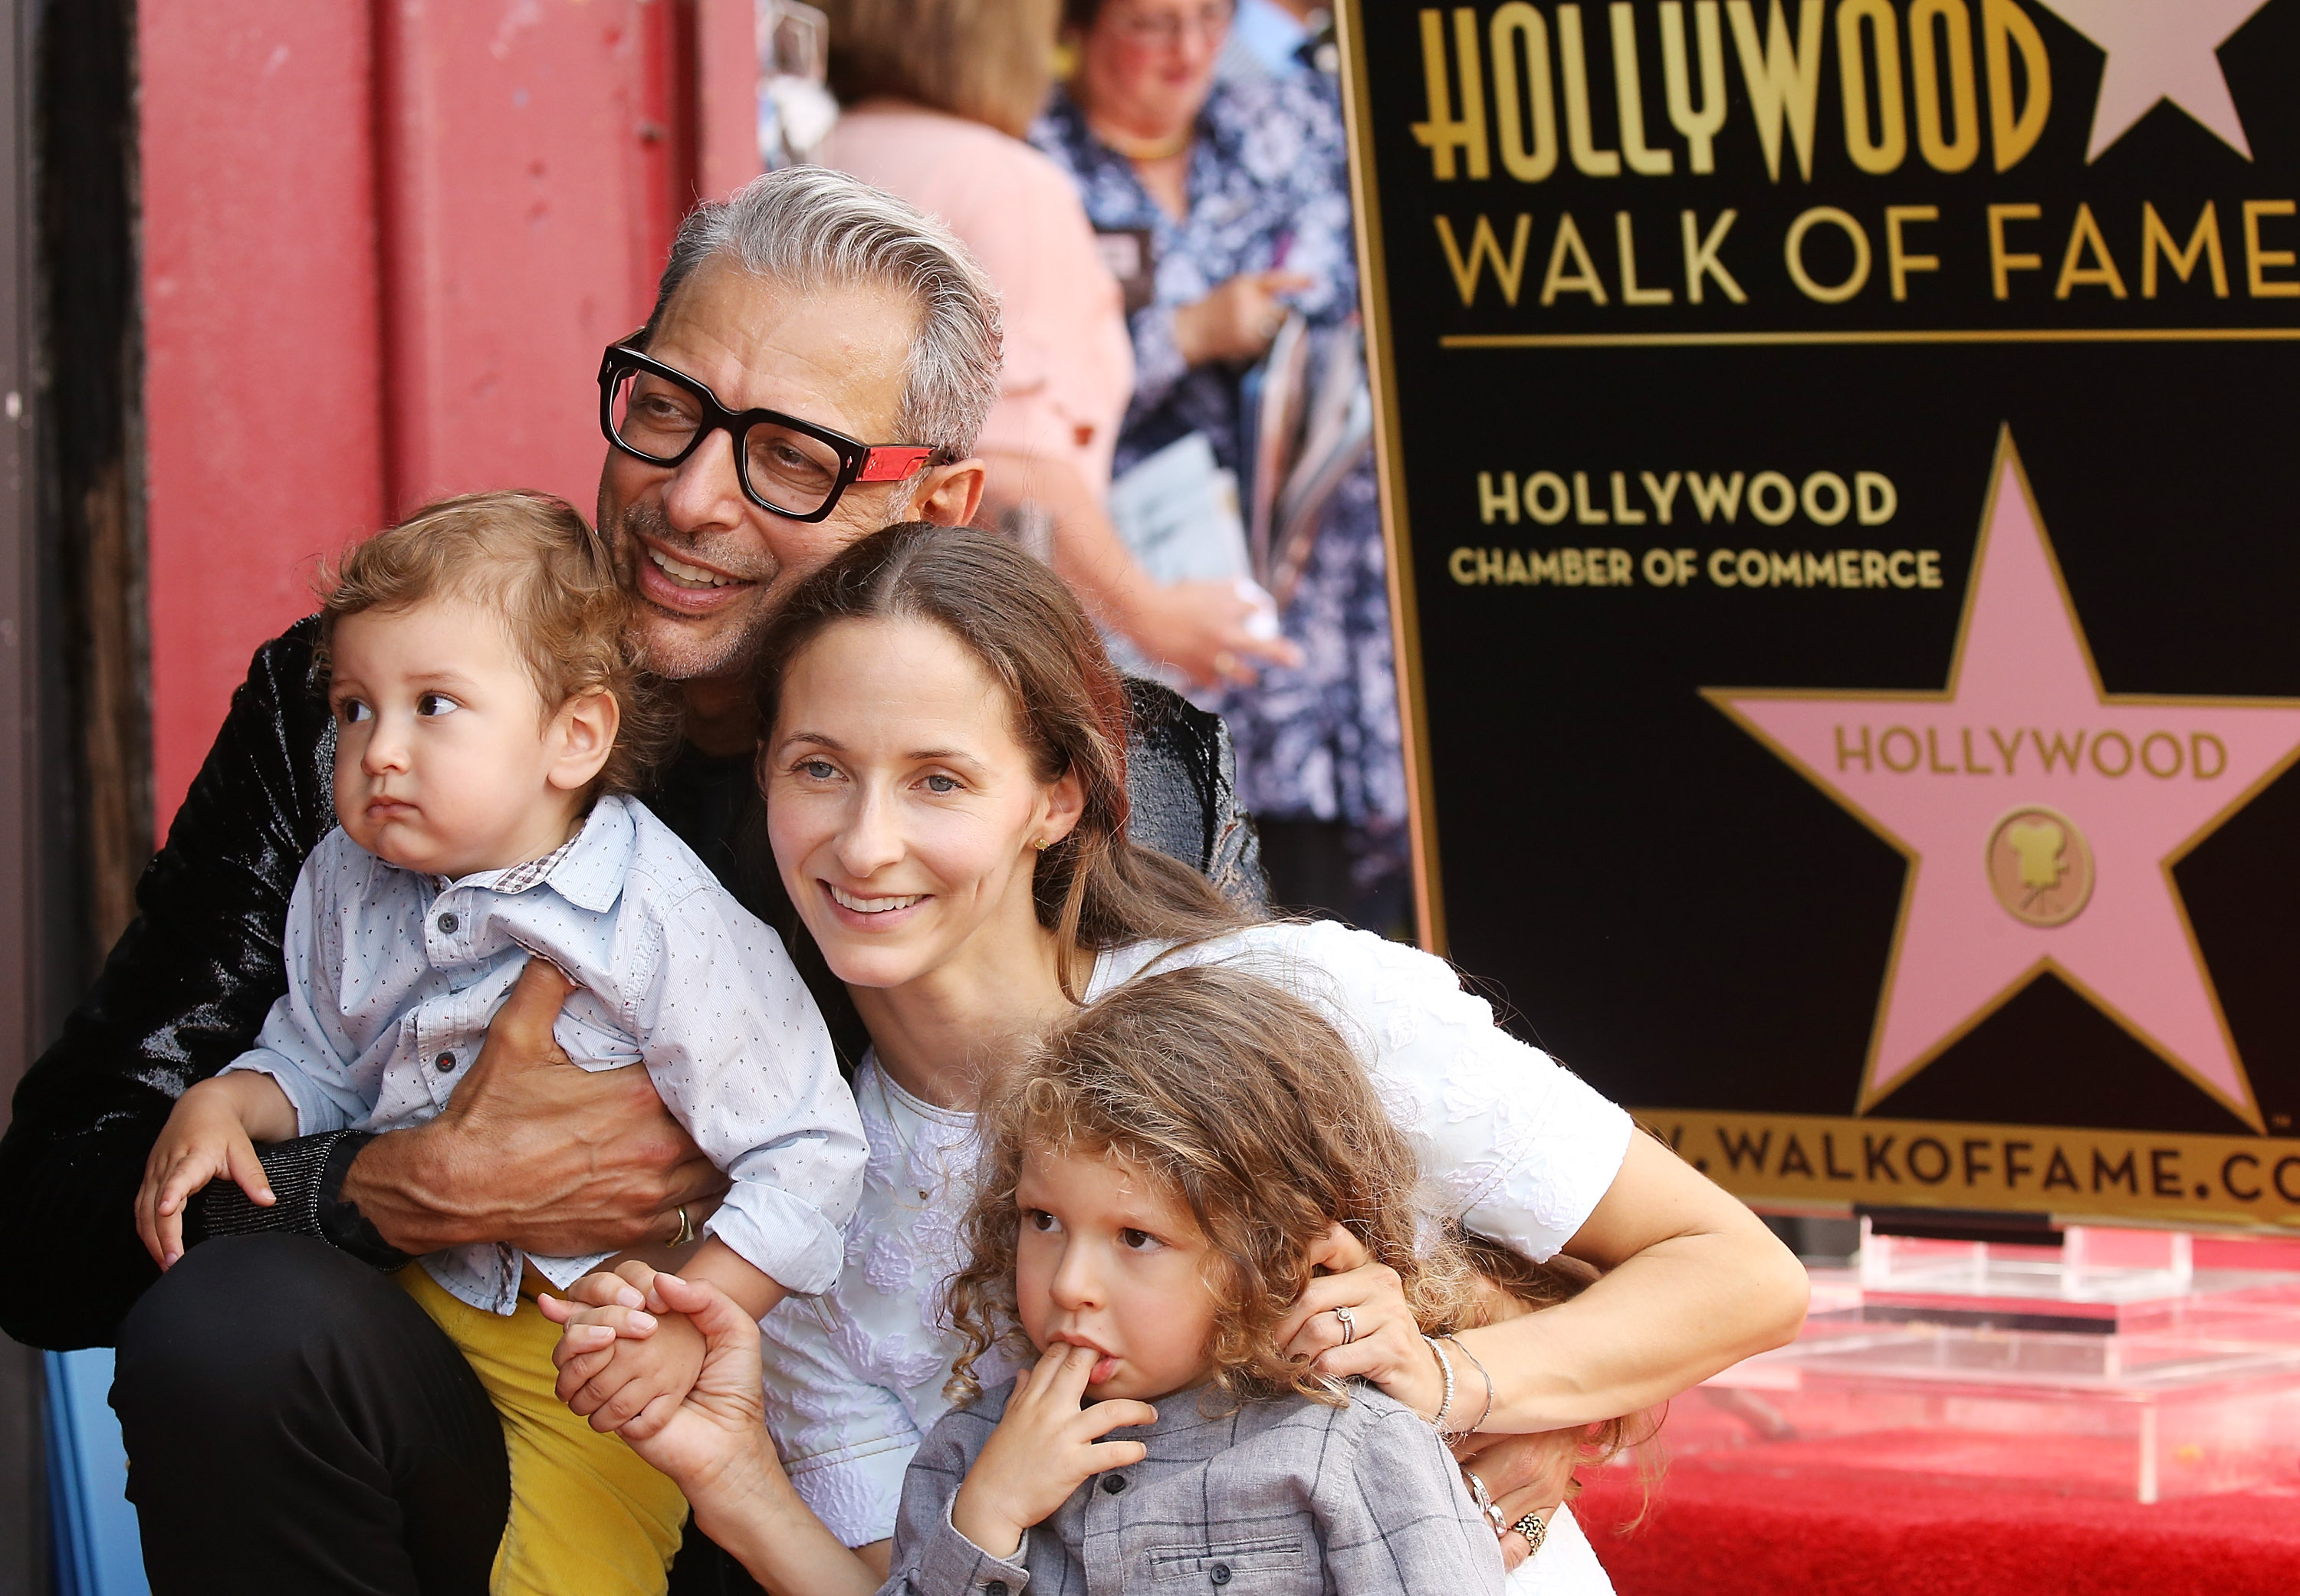 Fitness guru Emilie Goldblum on falling in love with husband Jeff Goldblum  and life after kids — The Retaility